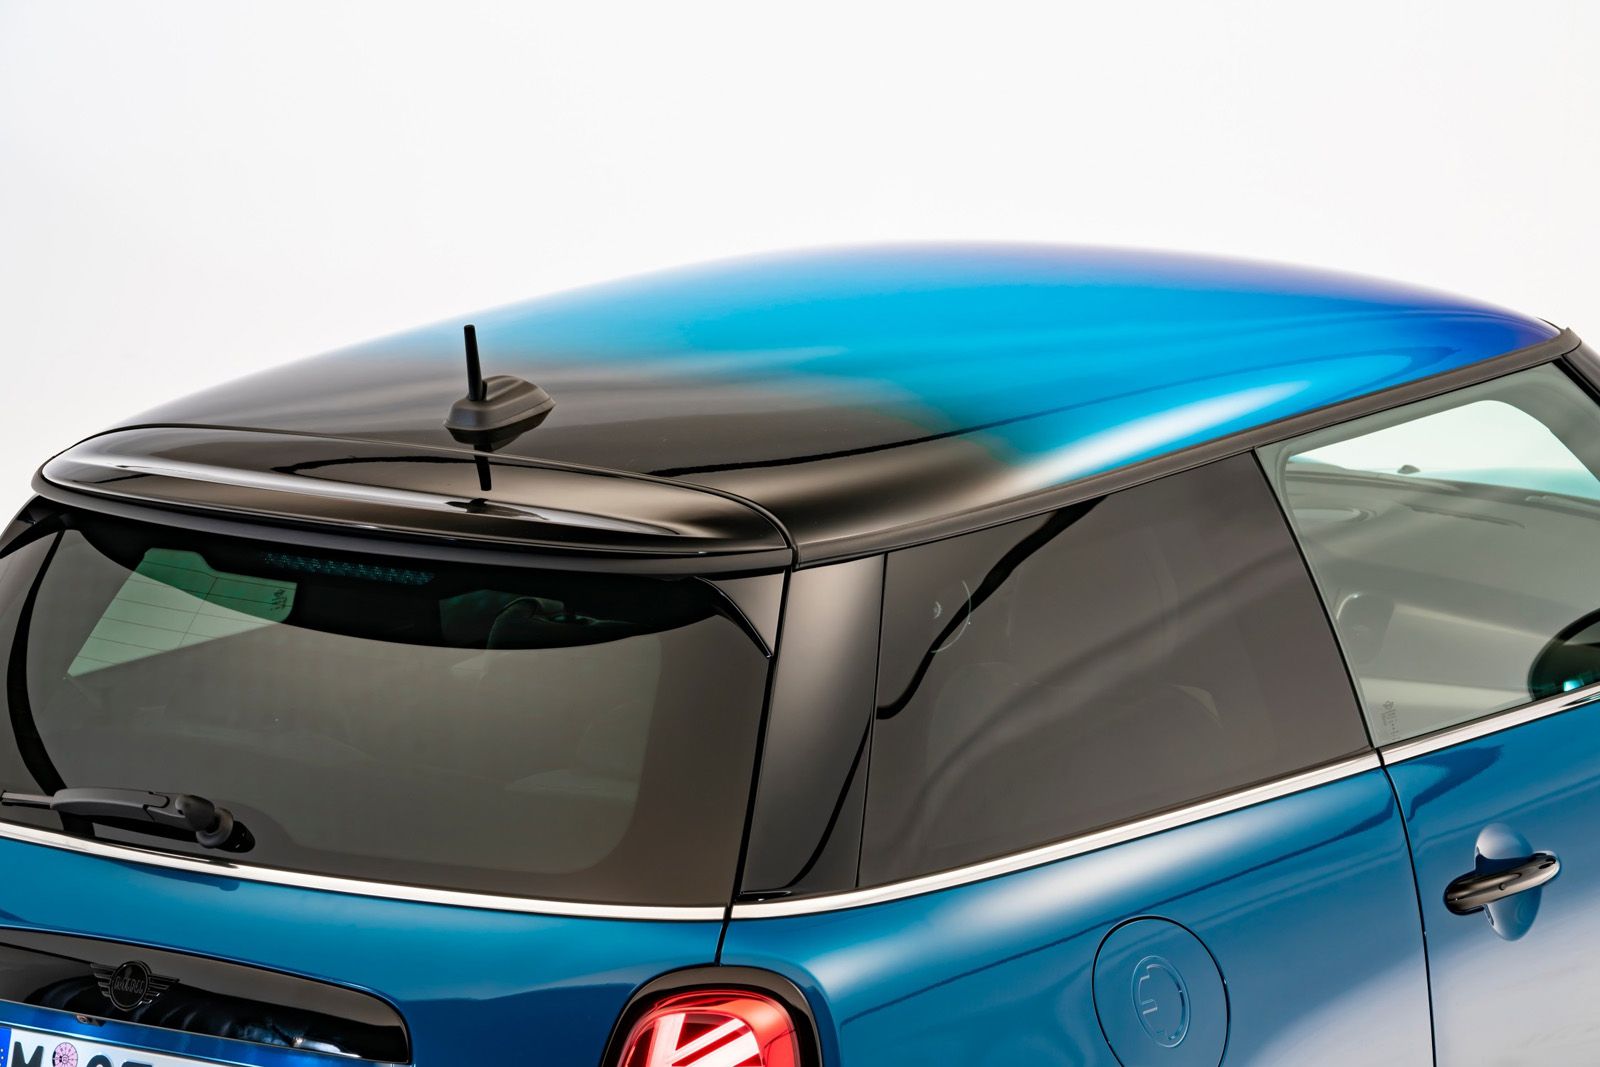 Mini updates make digital dash and 8-inch display standard, but it's the multitone roof that you'll notice photo 1